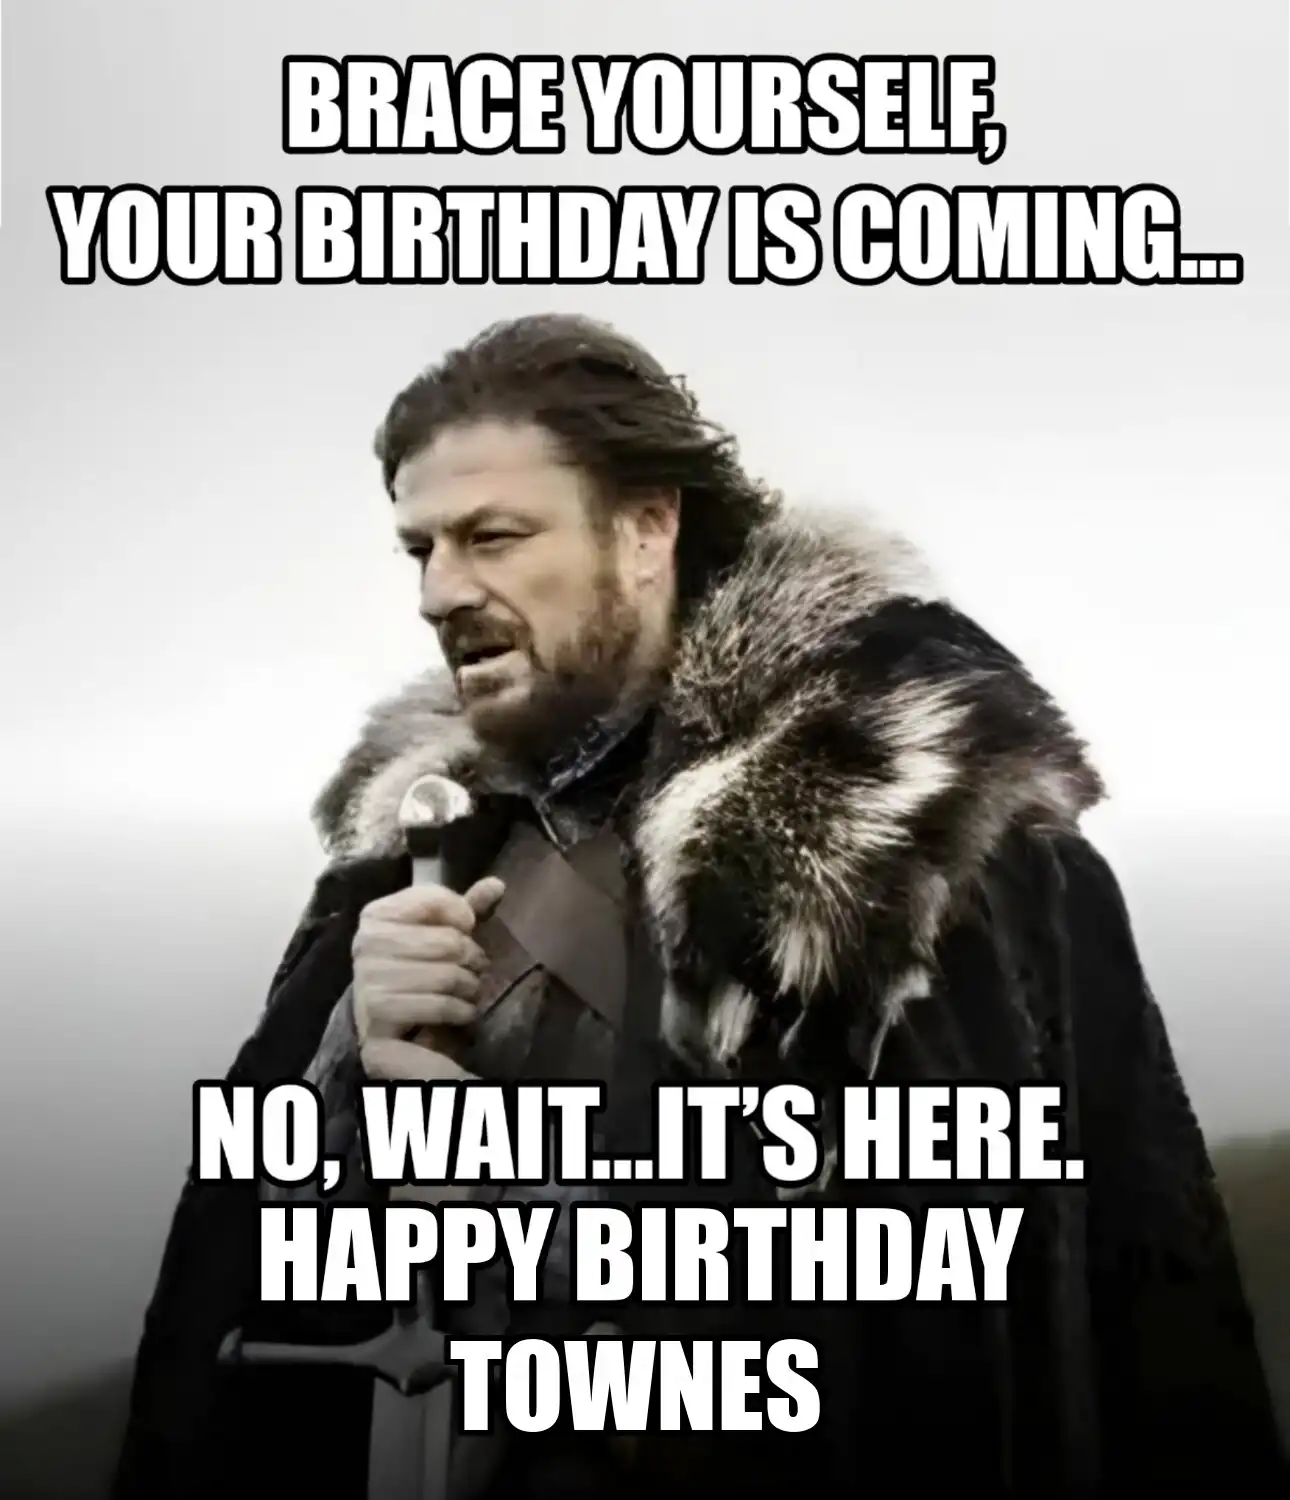 Happy Birthday Townes Brace Yourself Your Birthday Is Coming Meme